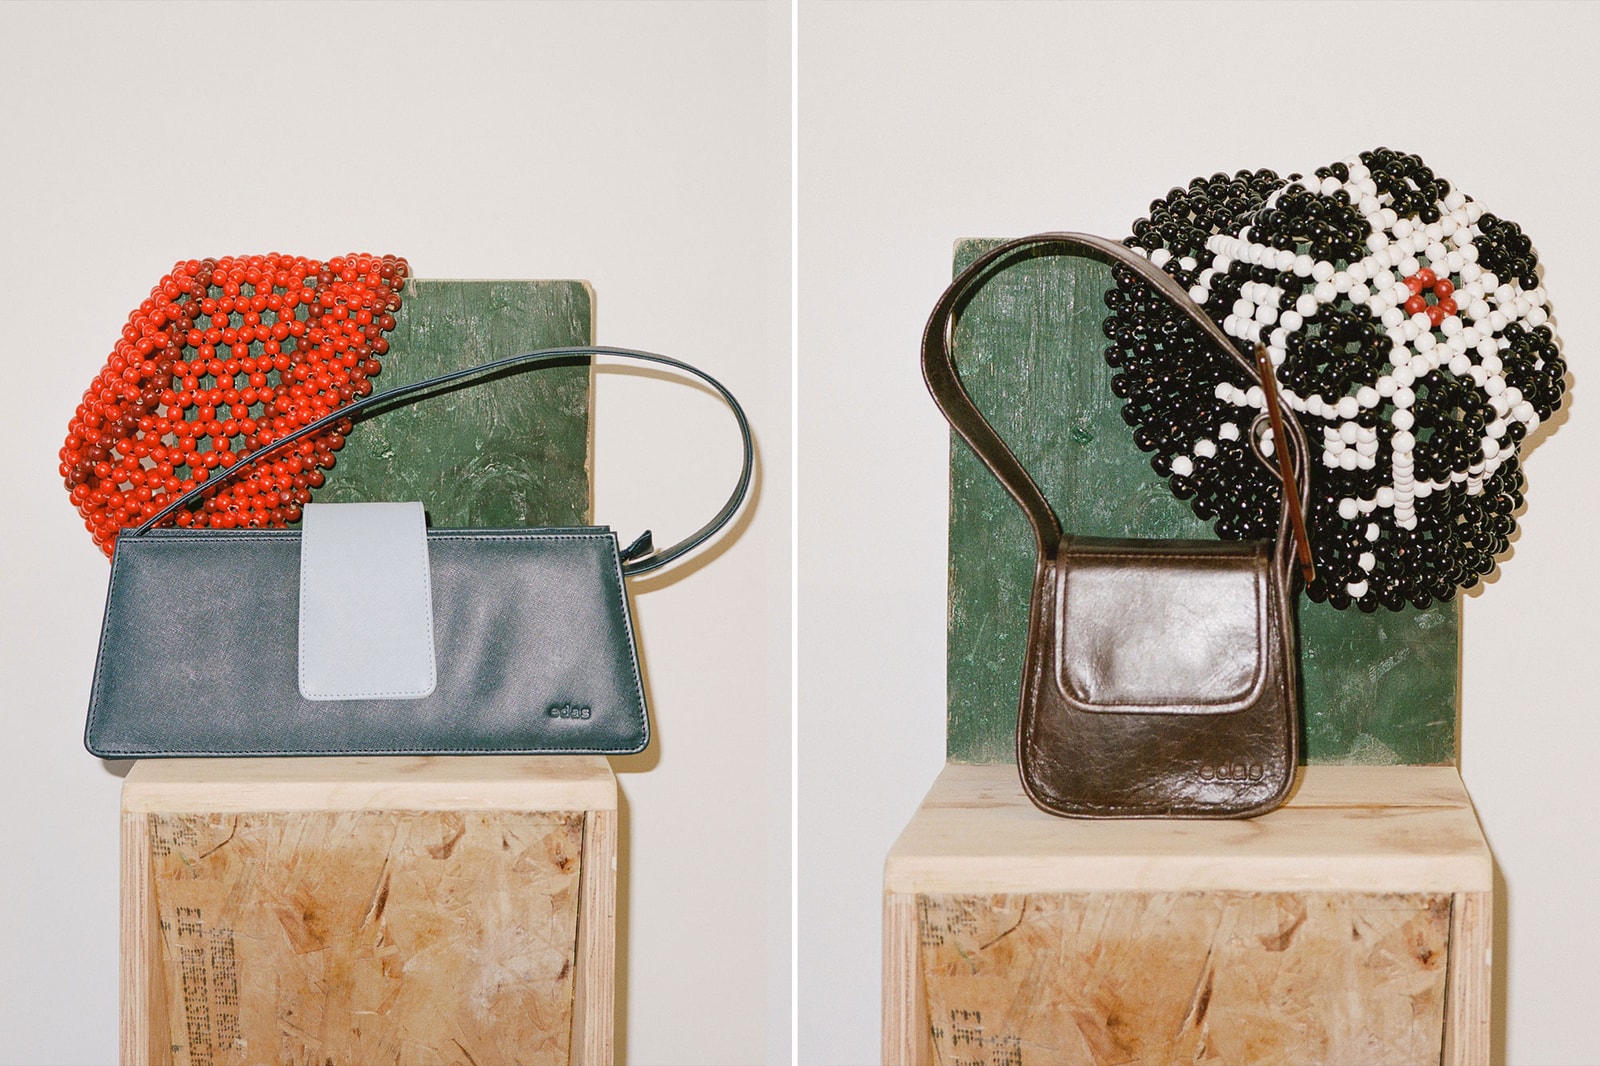 behind the atelier sade mims edas sustainable accessories brand handbags jewelry interview